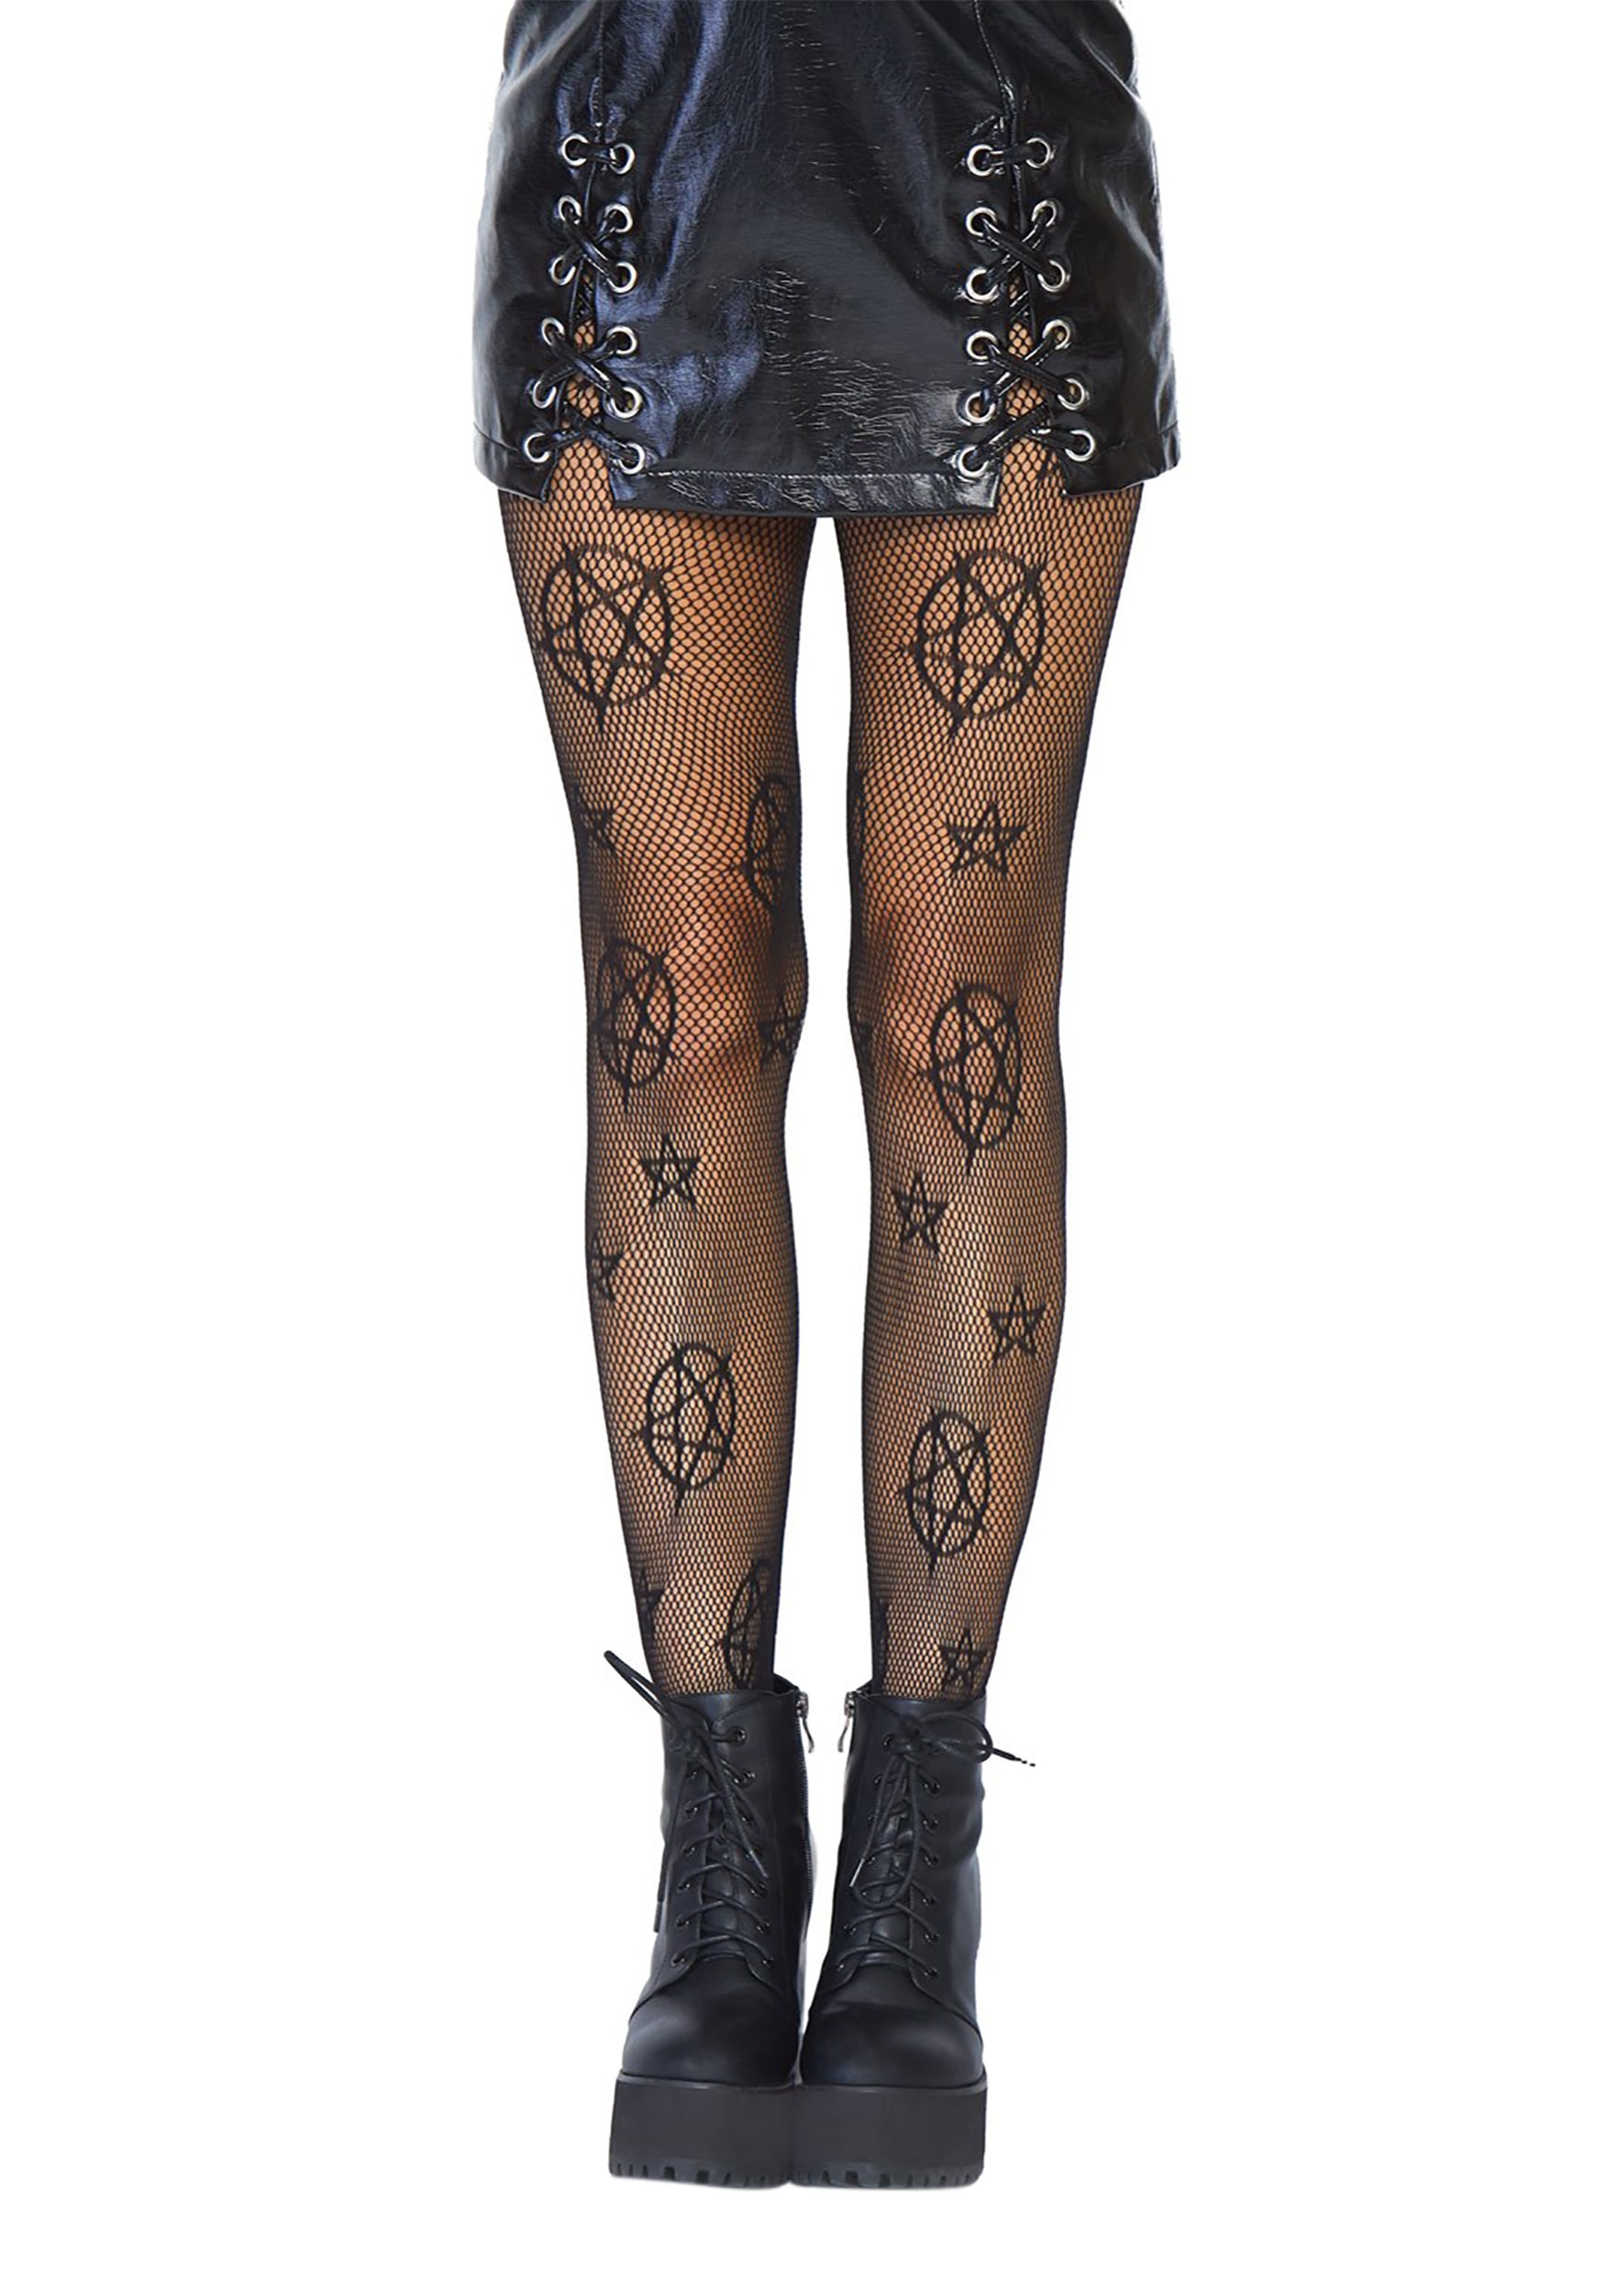 Women’s Occult Net Tights